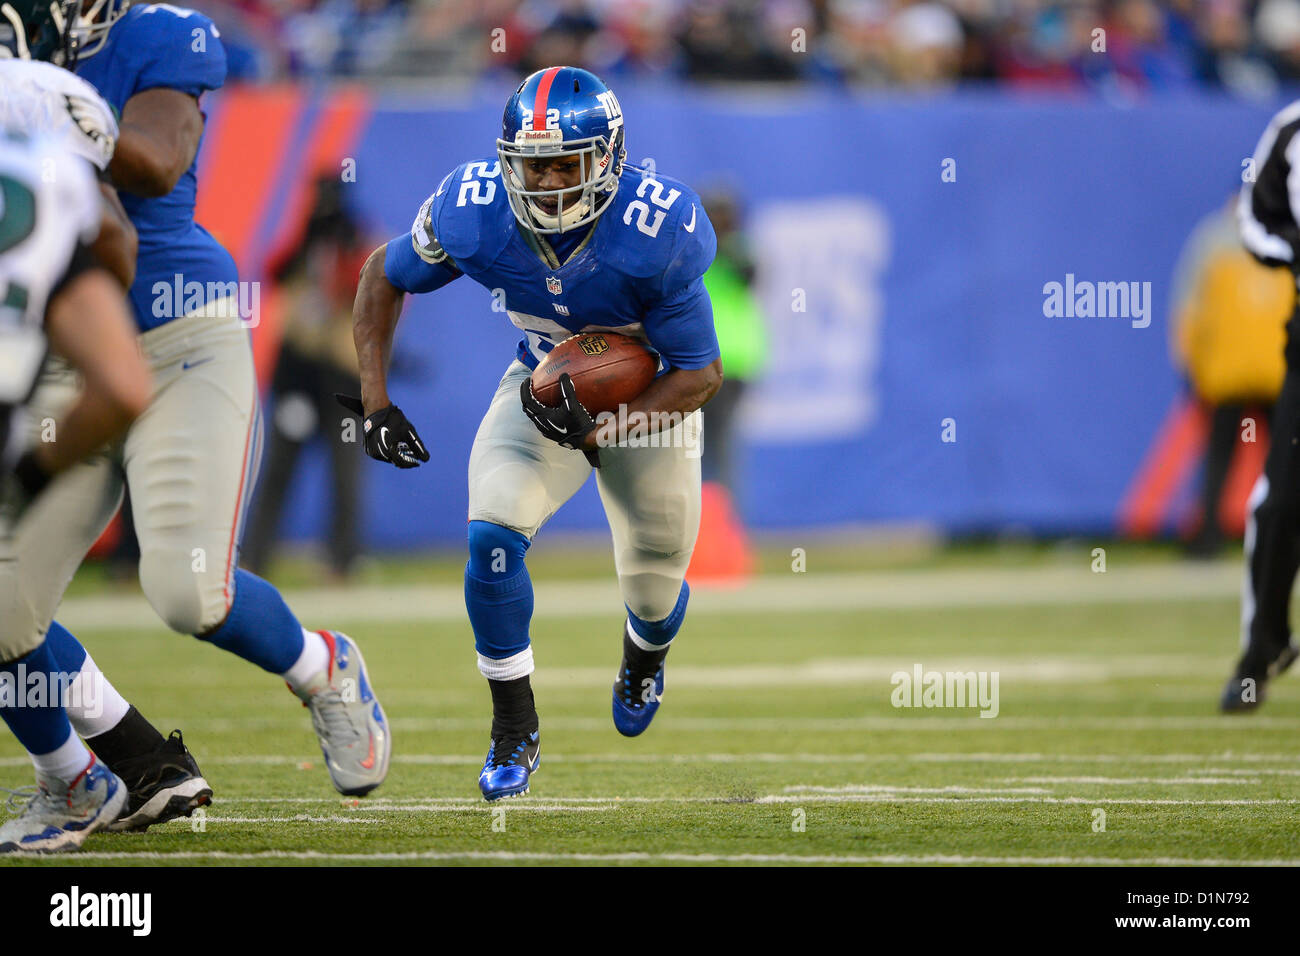 New Jersey, USA. 30 December 2012: New York Giants running back David Wilson (22) carries the ball during a week 17 NFL matchup between the Philadelphia Eagles and New York Giants at MetLife Stadium in East Rutherford, New Jersey. The Giants defeated the Eagles 42-7. Stock Photo